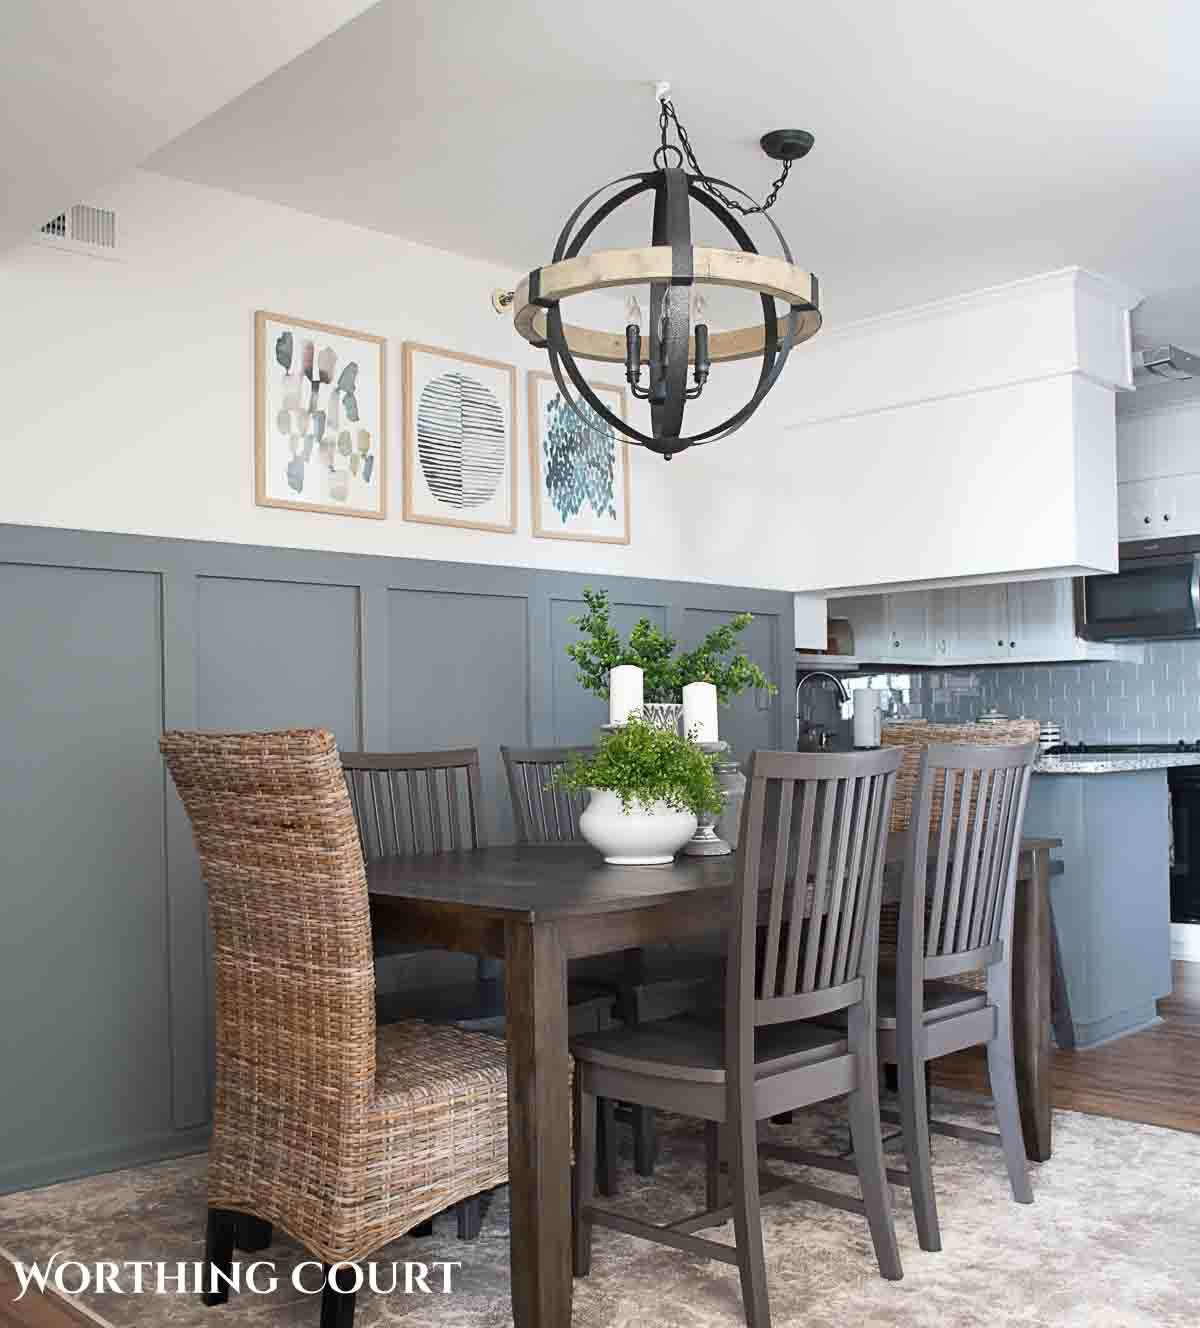 orb shaped chandelier above a gray dining table with wicker head chairs in a beach condo